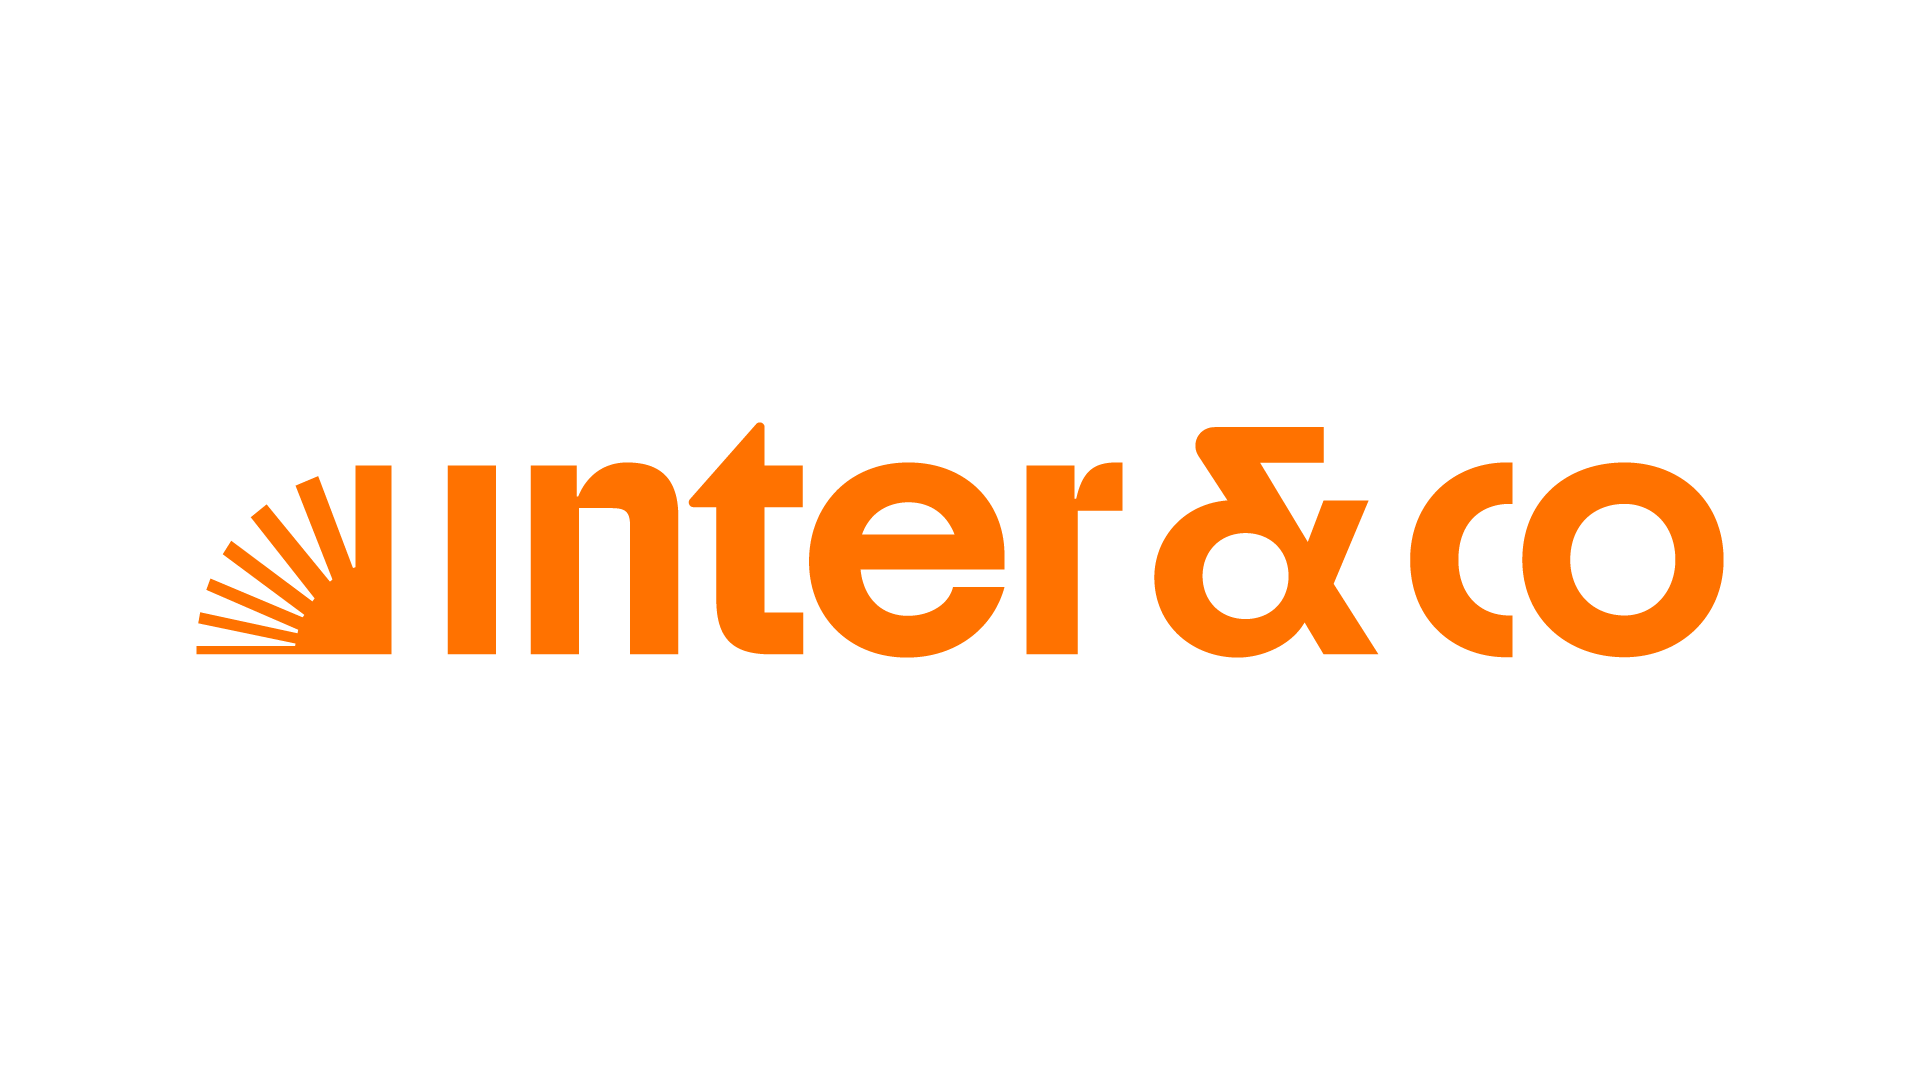 Inter_Co_new_brand_1_png.png